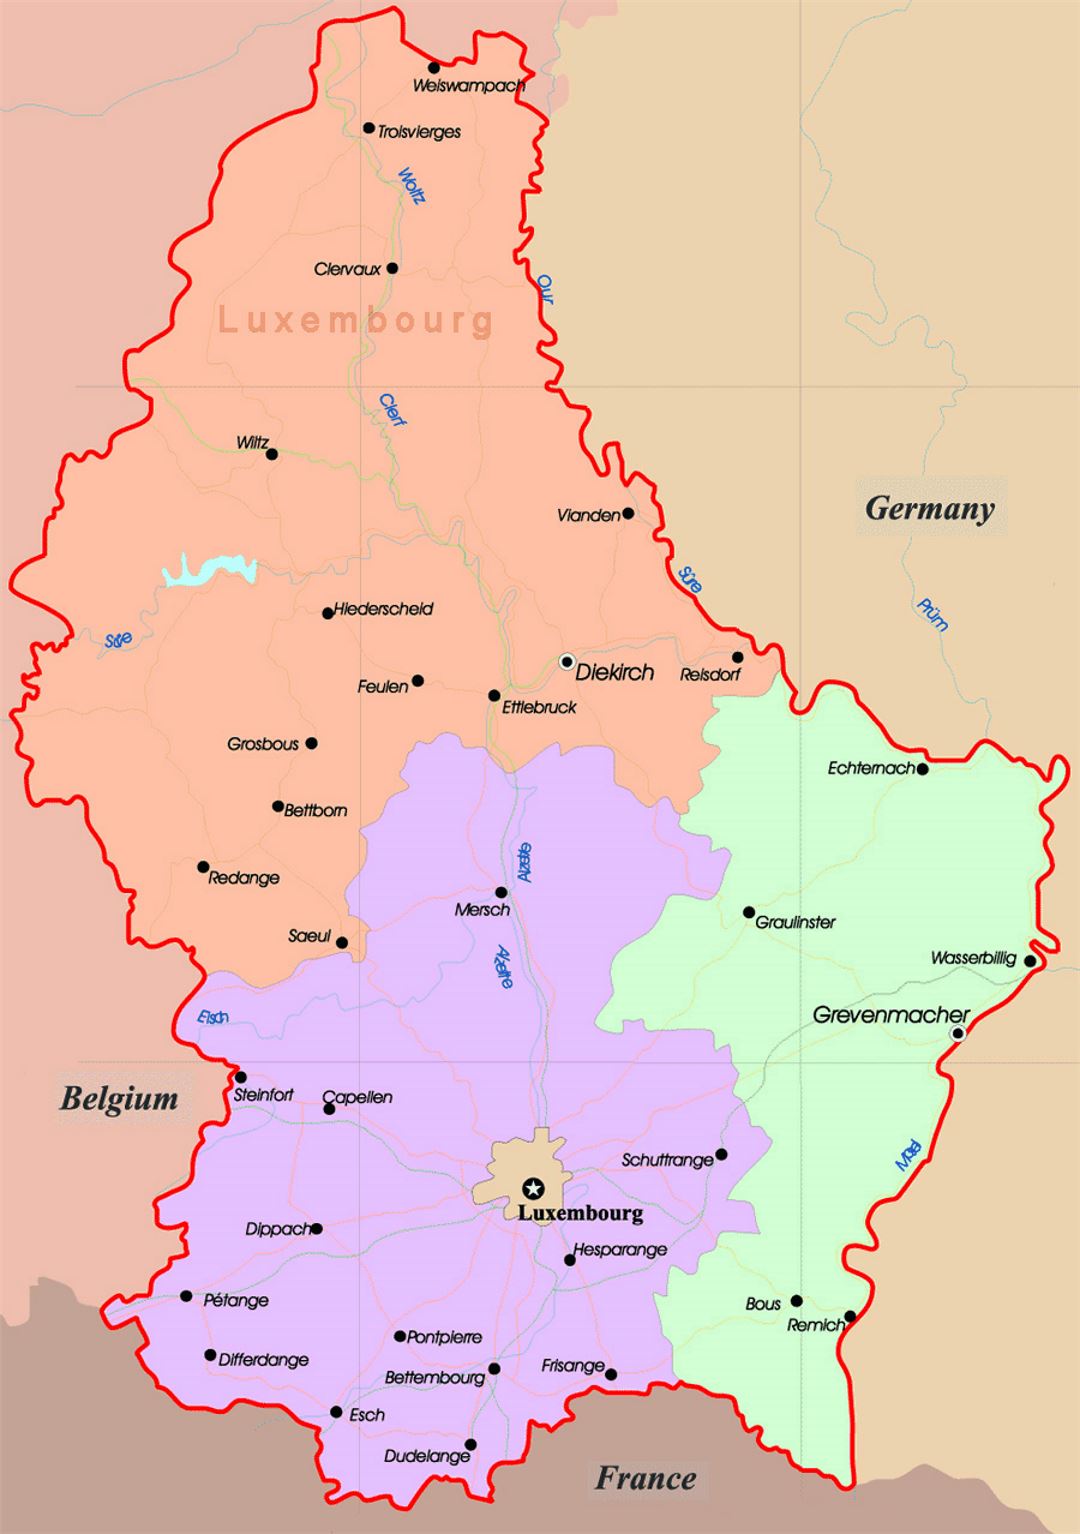 Detailed administrative map of Luxembourg with roads and major cities